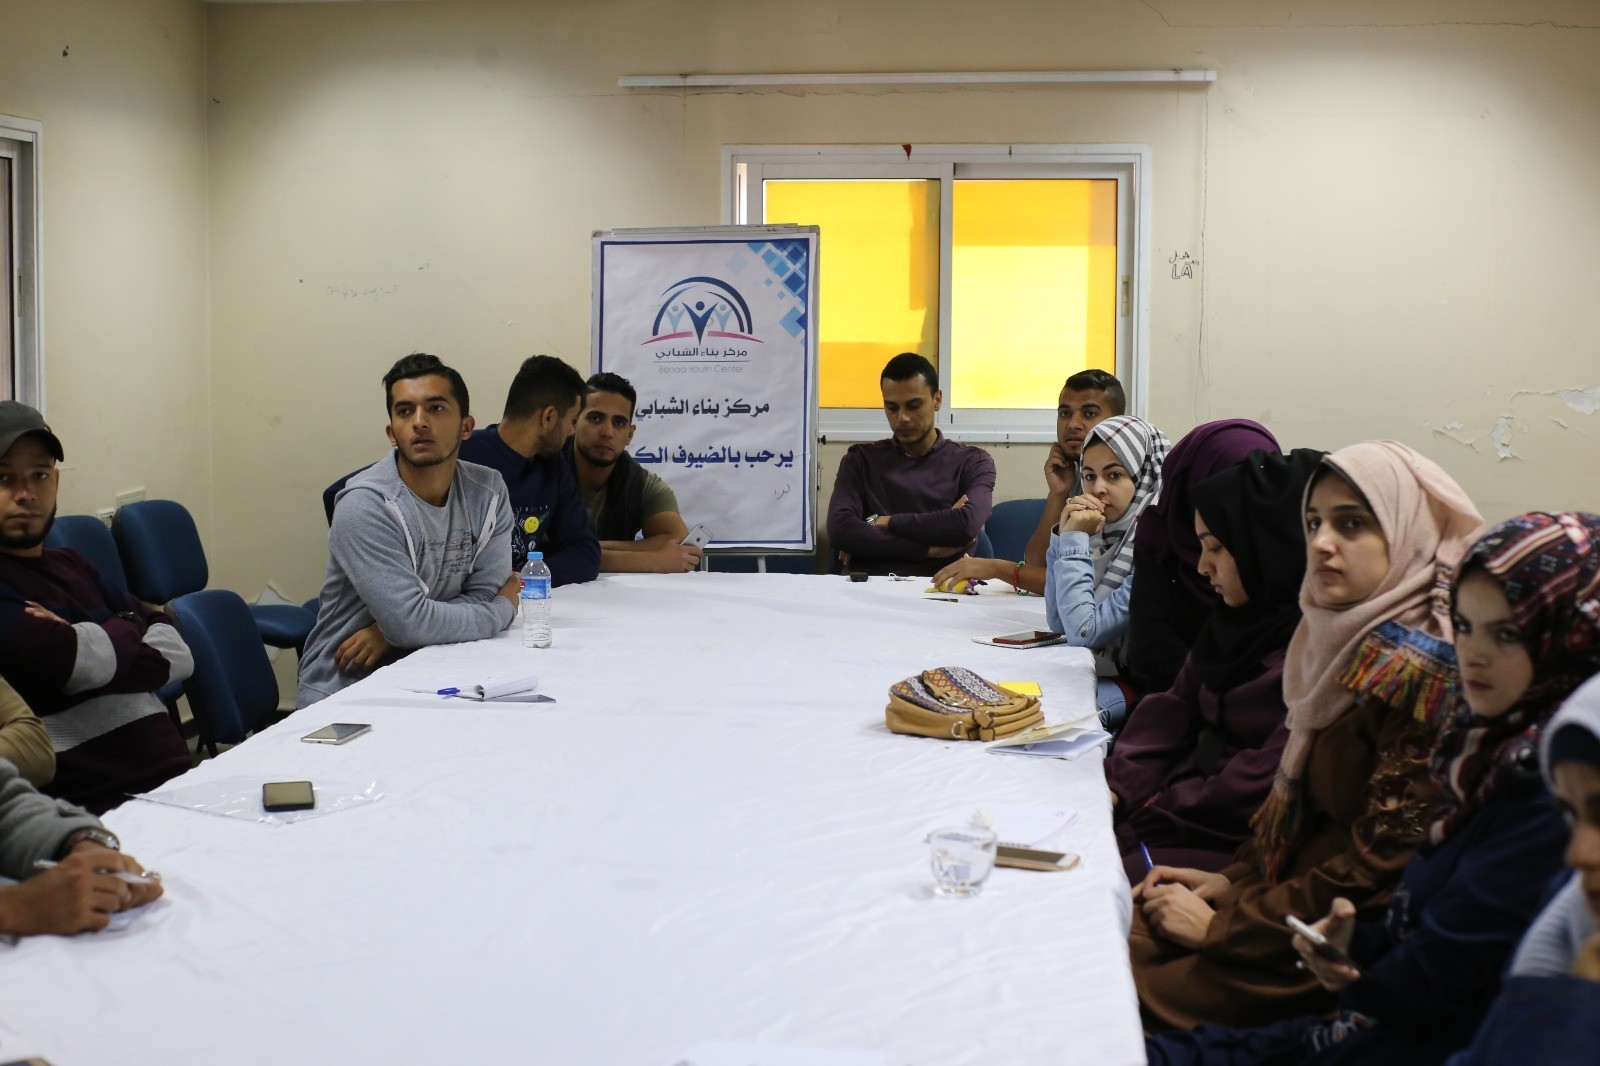 With funding from the Press House.. Benaa Youth Center conducts “Soshilha-Sah” initiative